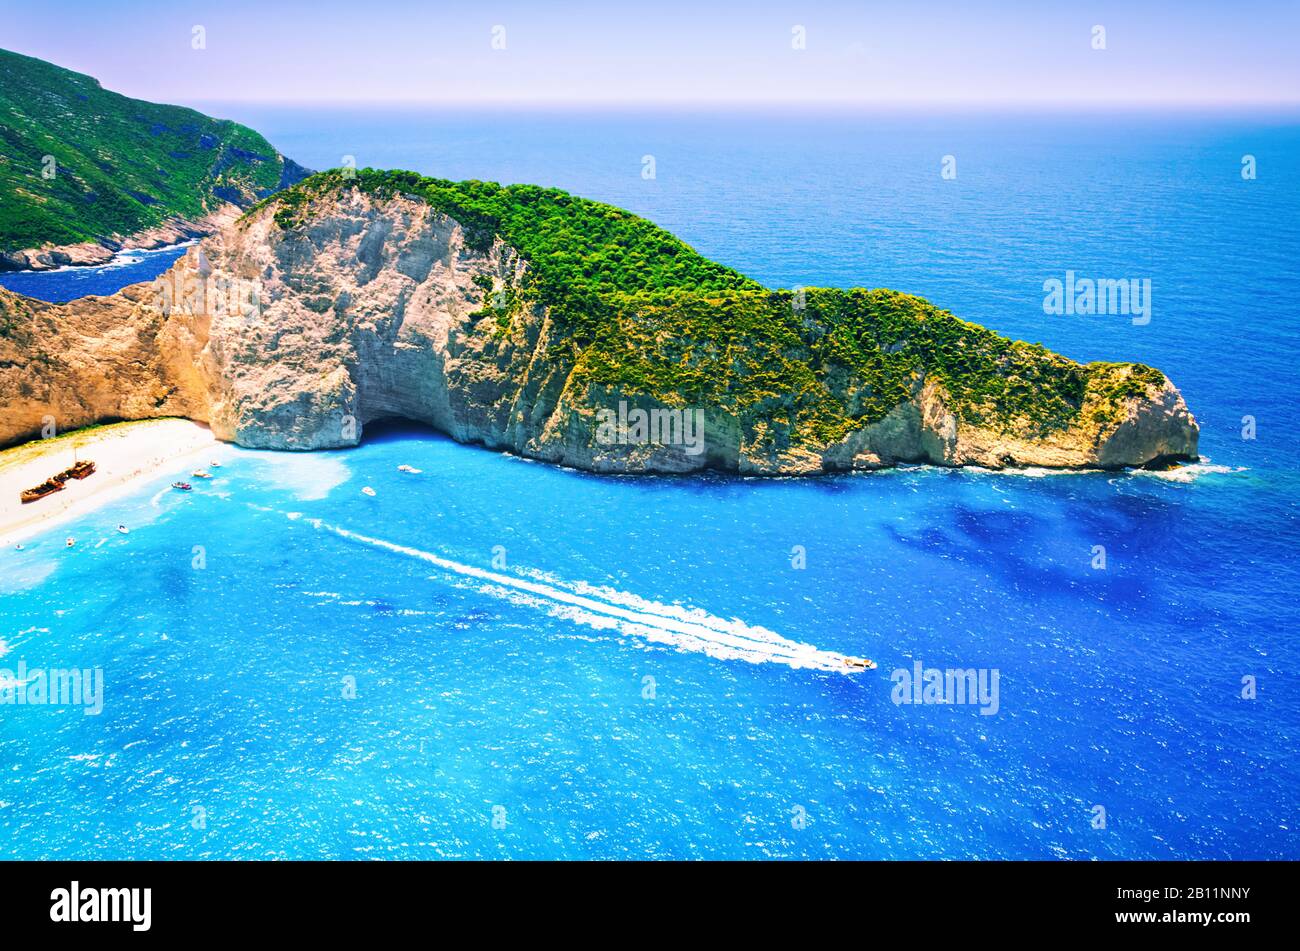 Shipwreck beach at Navagio bay. Zakynthos island, Greece. The most famous and fotographed beach in the world Stock Photo